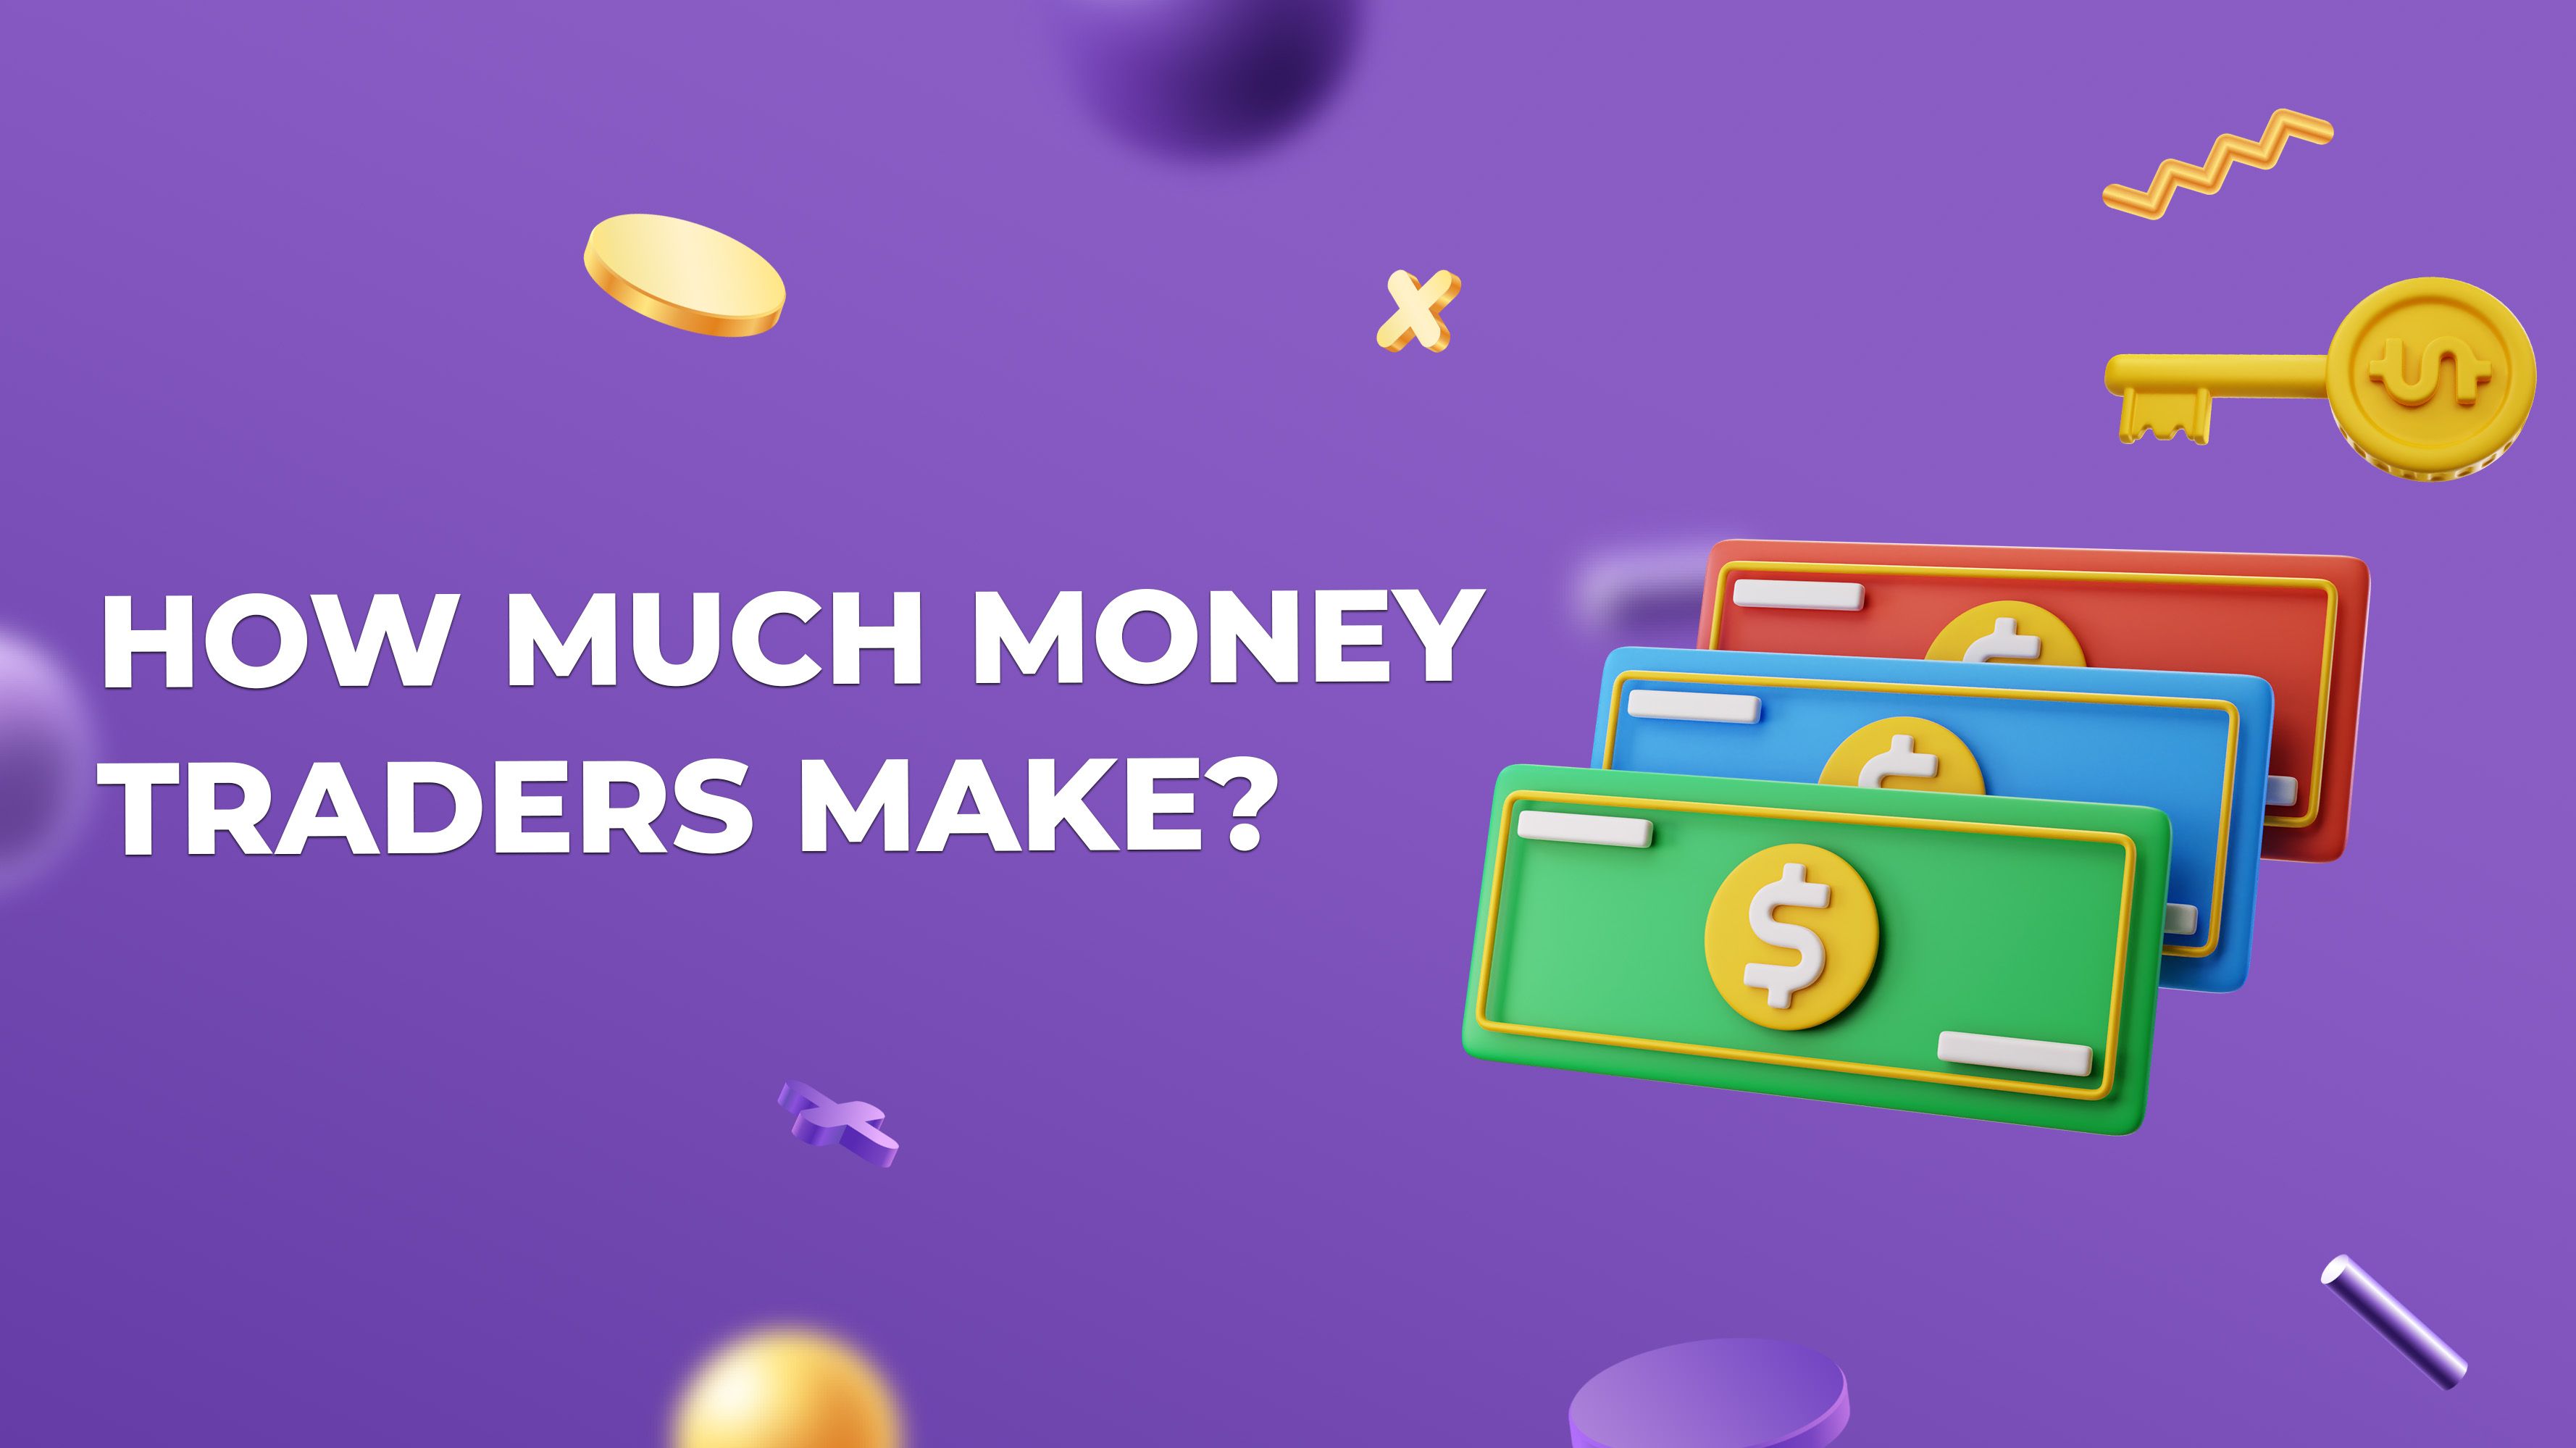 HOW MUCH MONEY DO TRADERS MAKE? HOW MUCH MONEY CAN YOU MAKE TRADING CRYPTOCURRENCY?